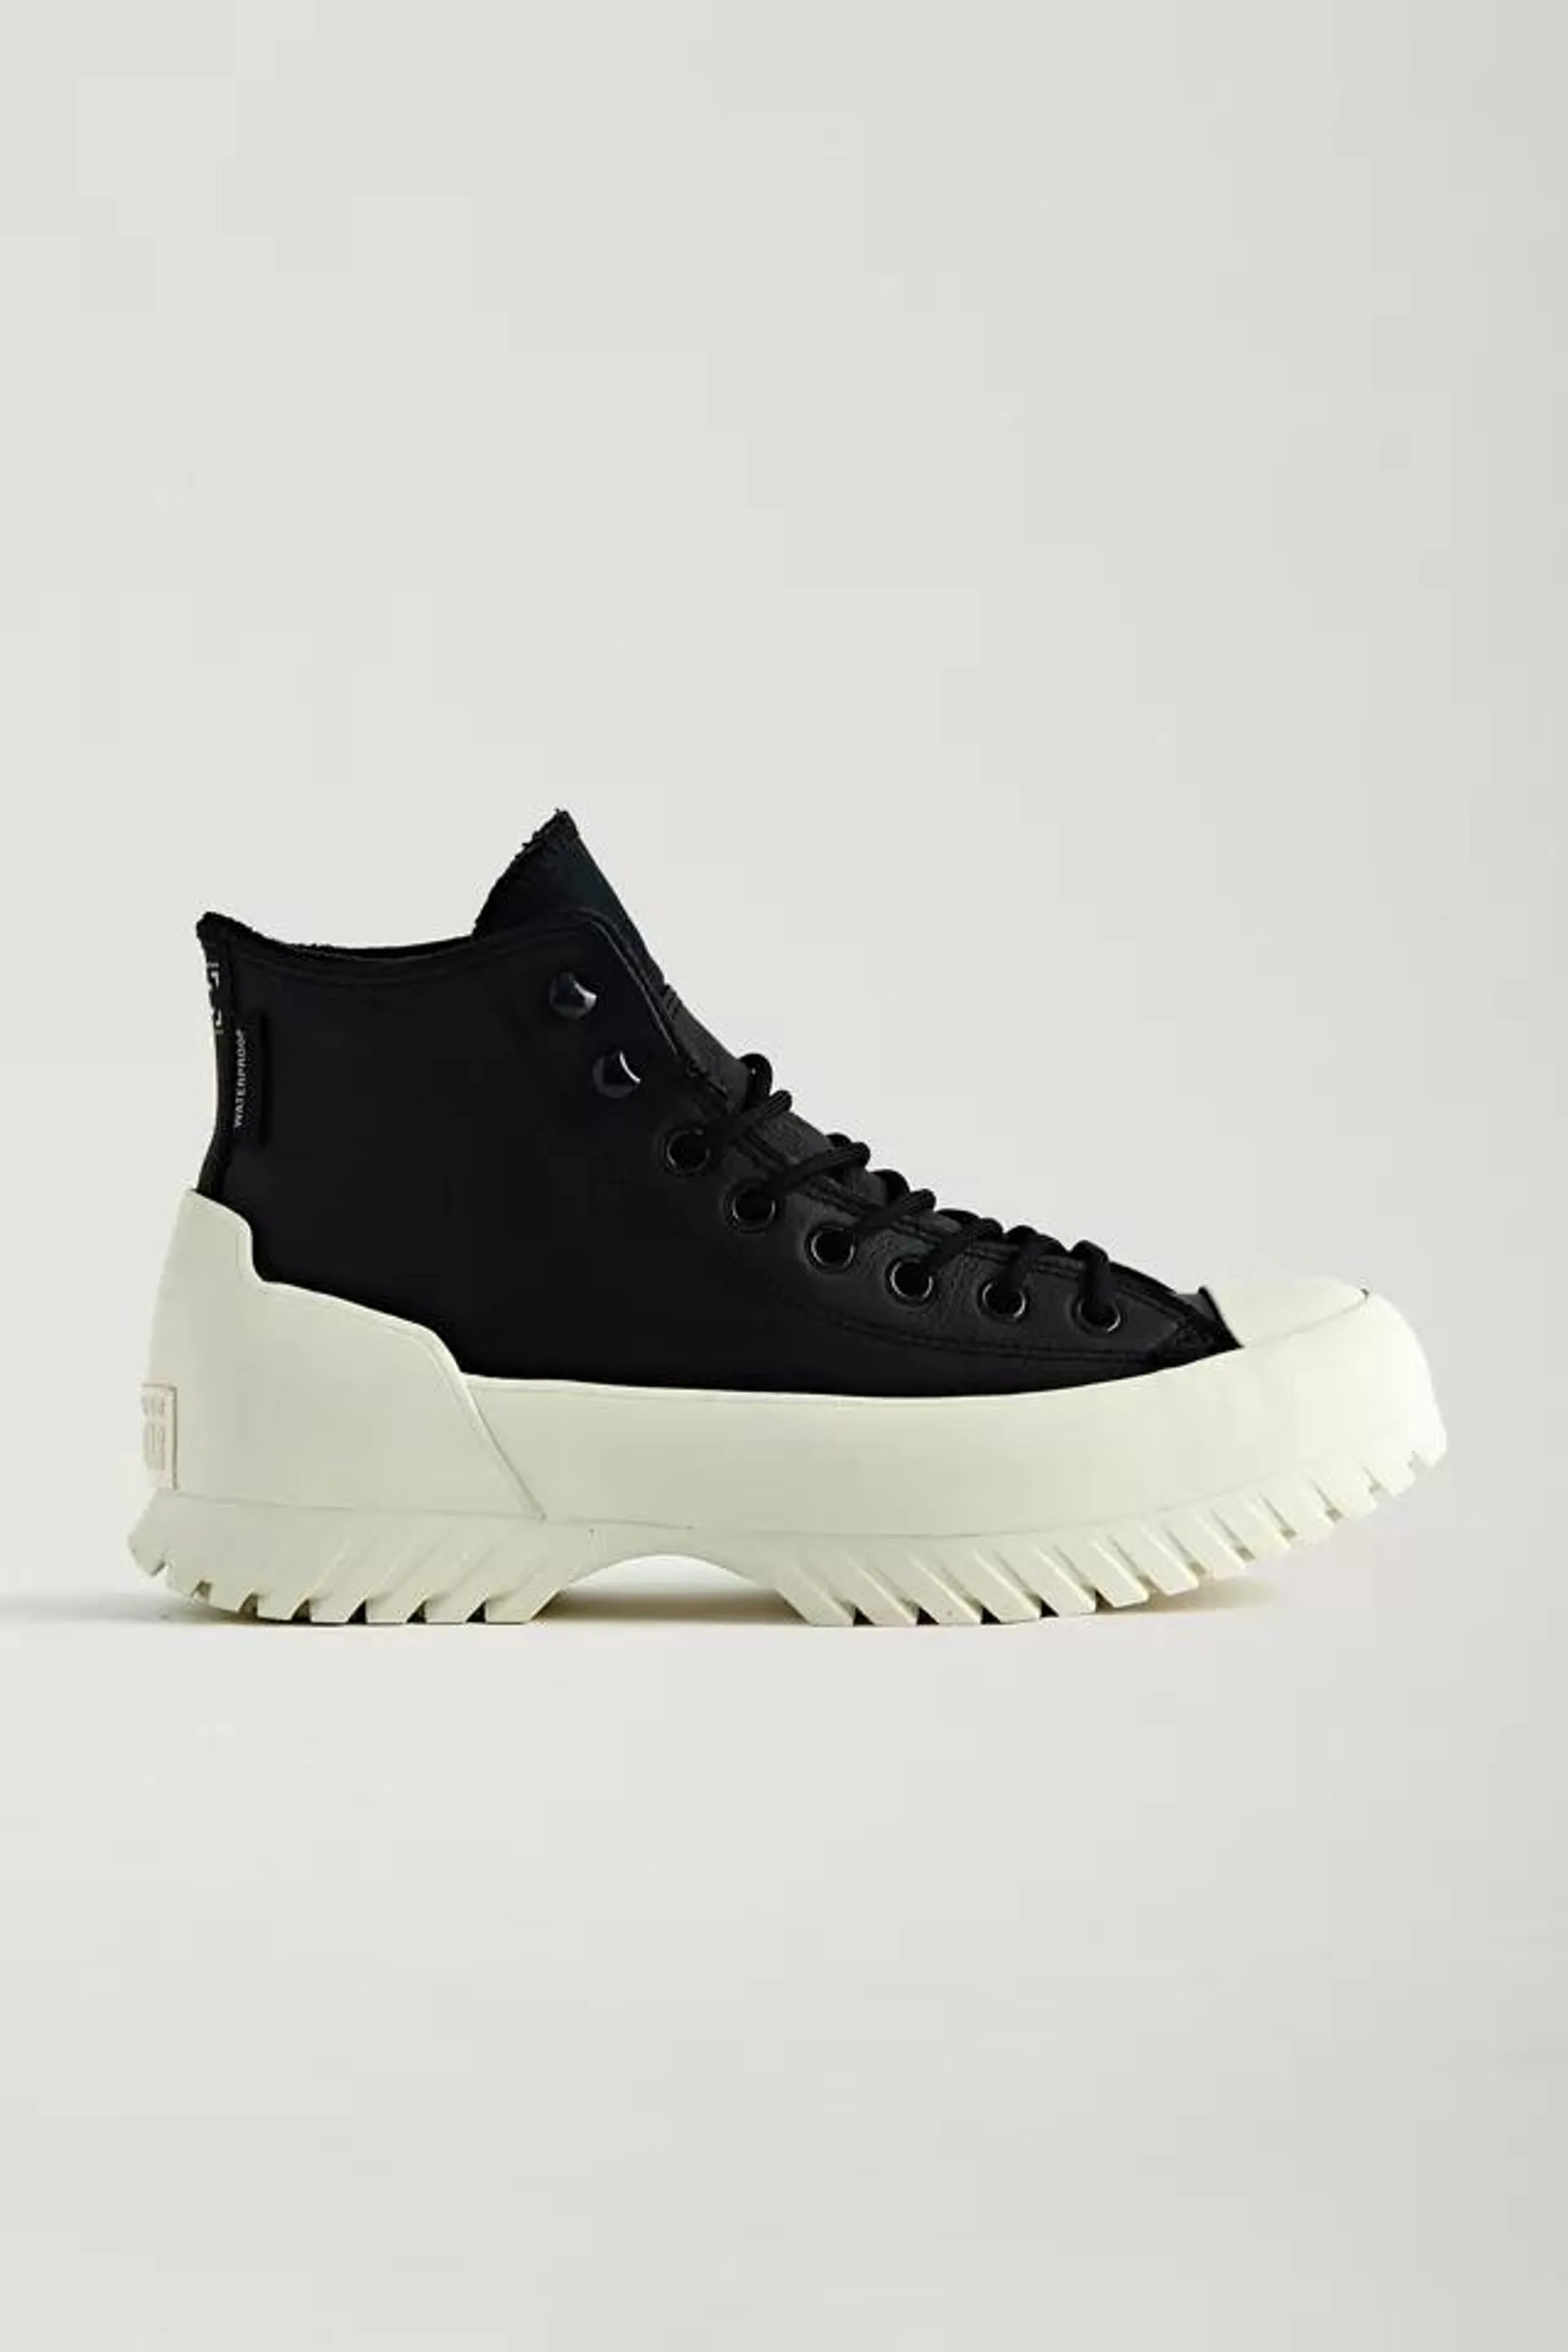 Converse Chuck Taylor All Star Lugged Mid Sneaker Boot